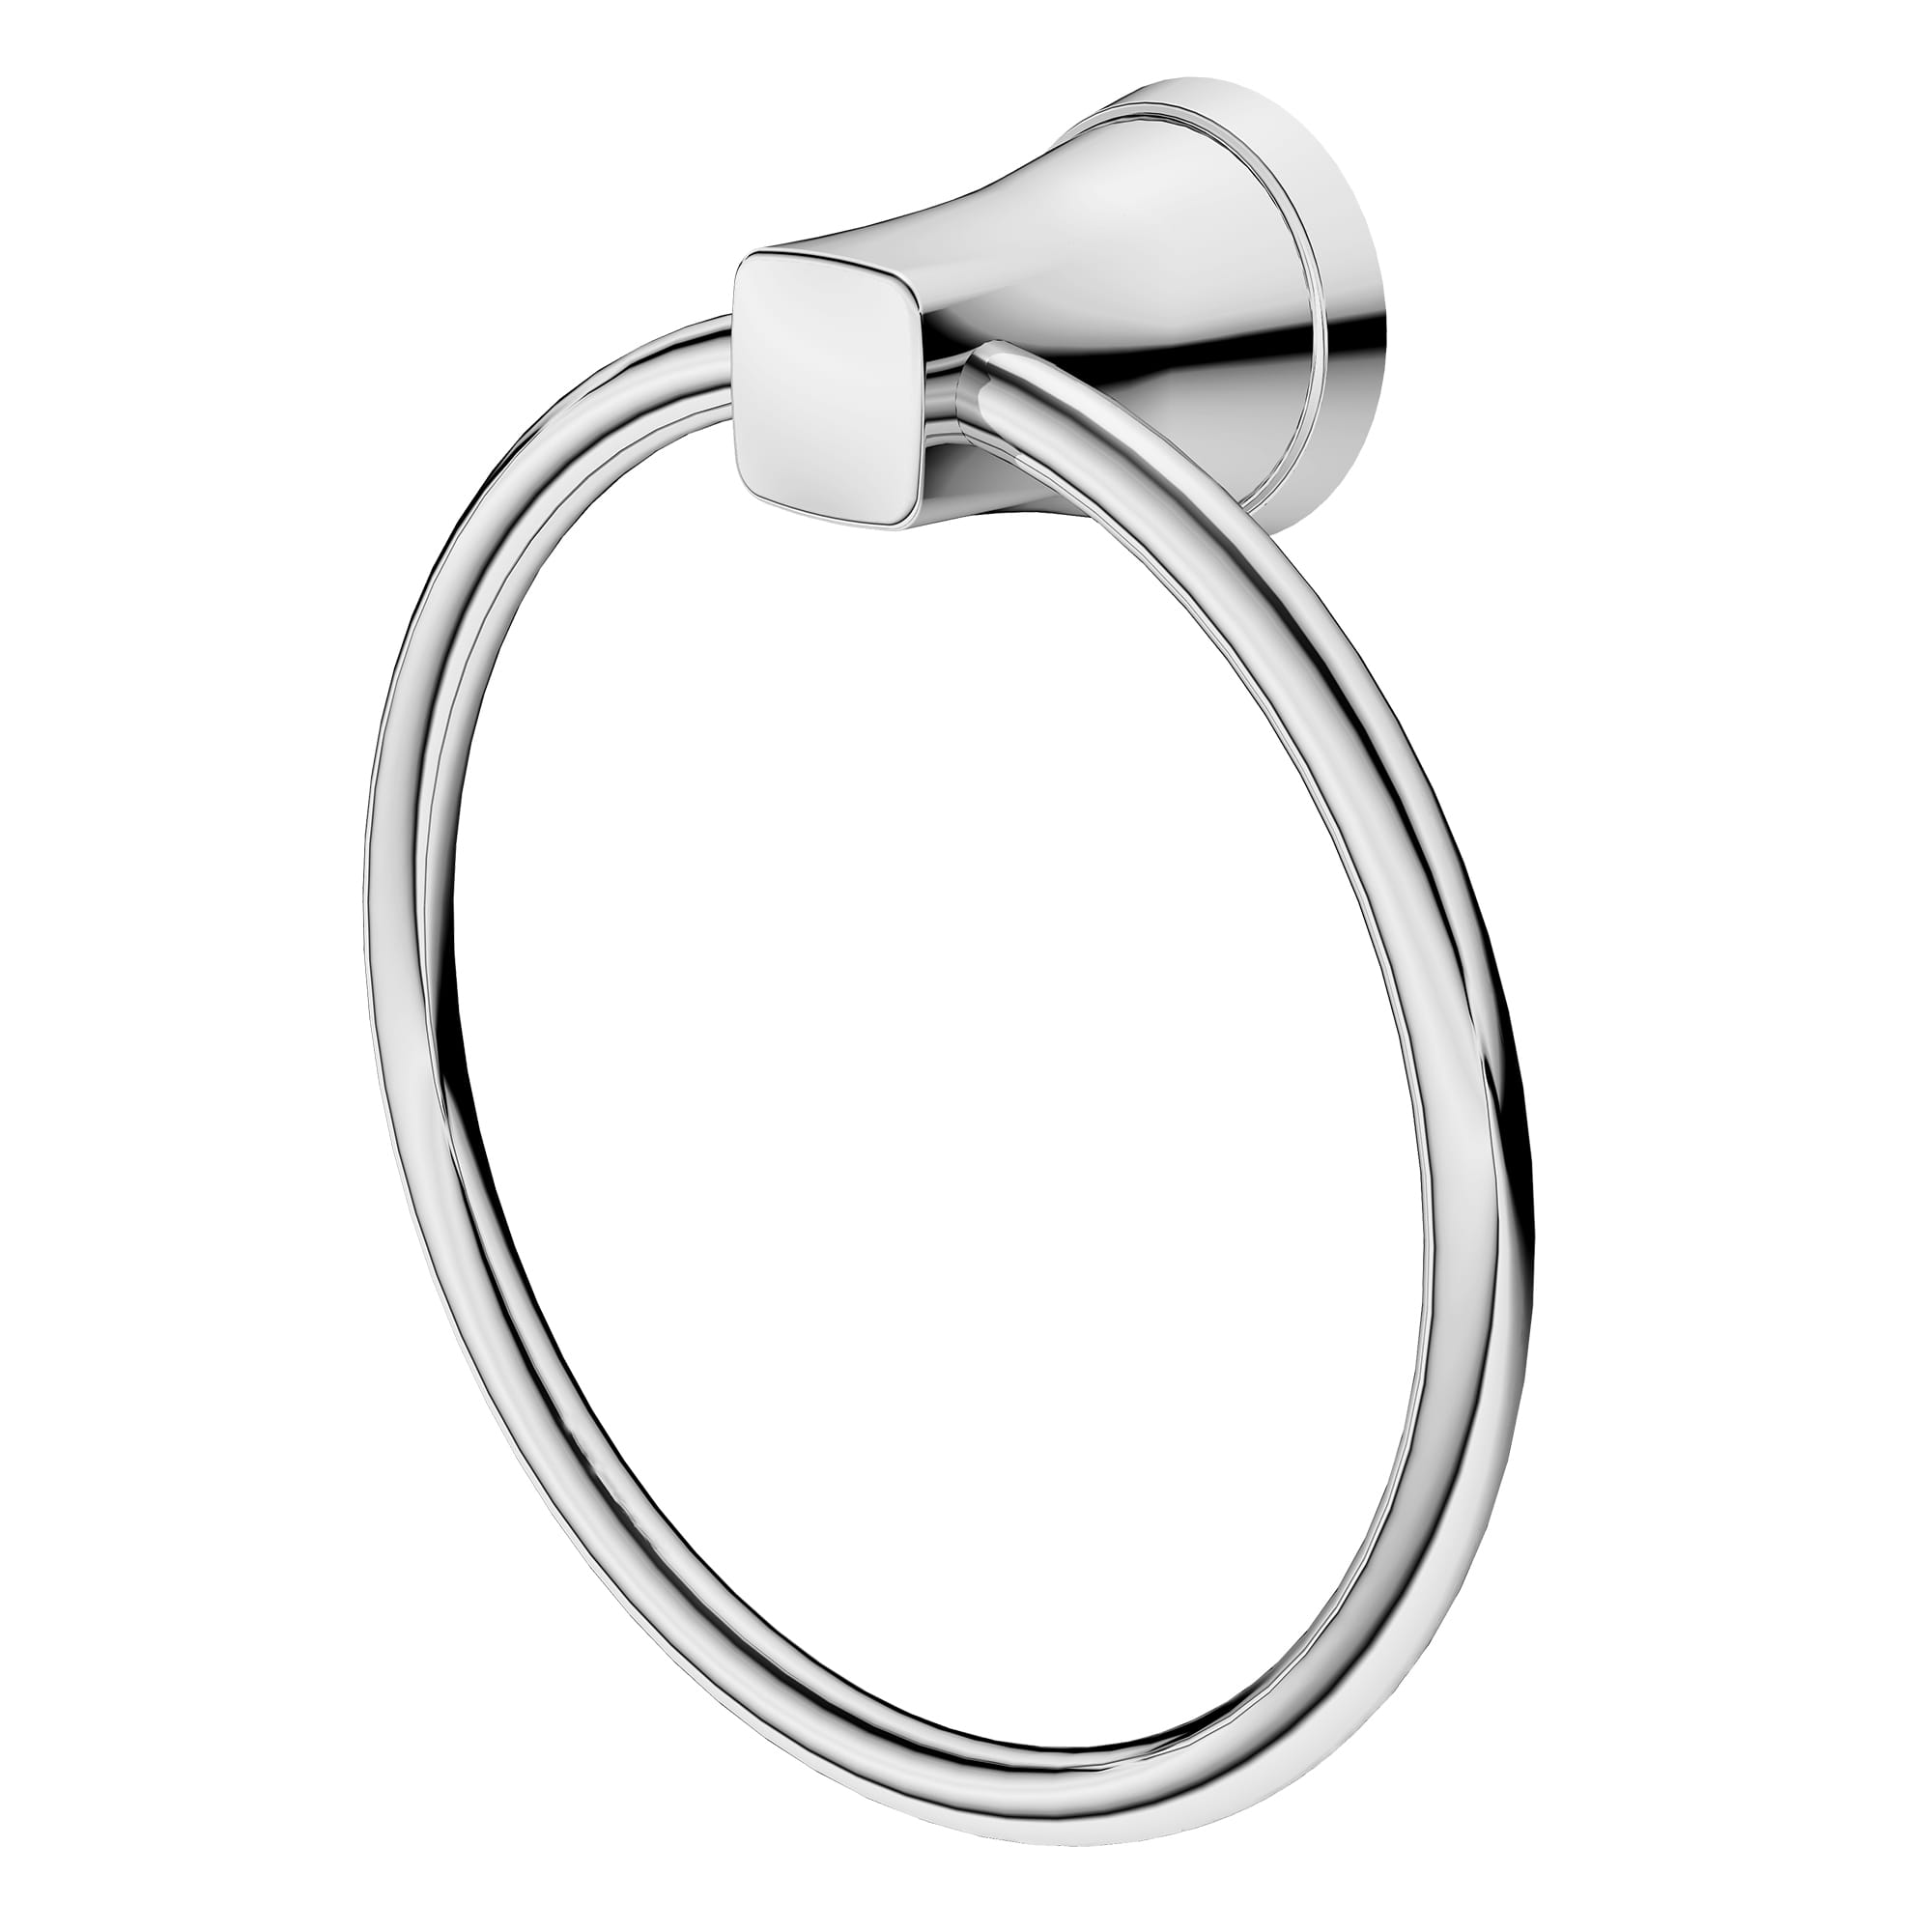 Glenmere Towel Ring